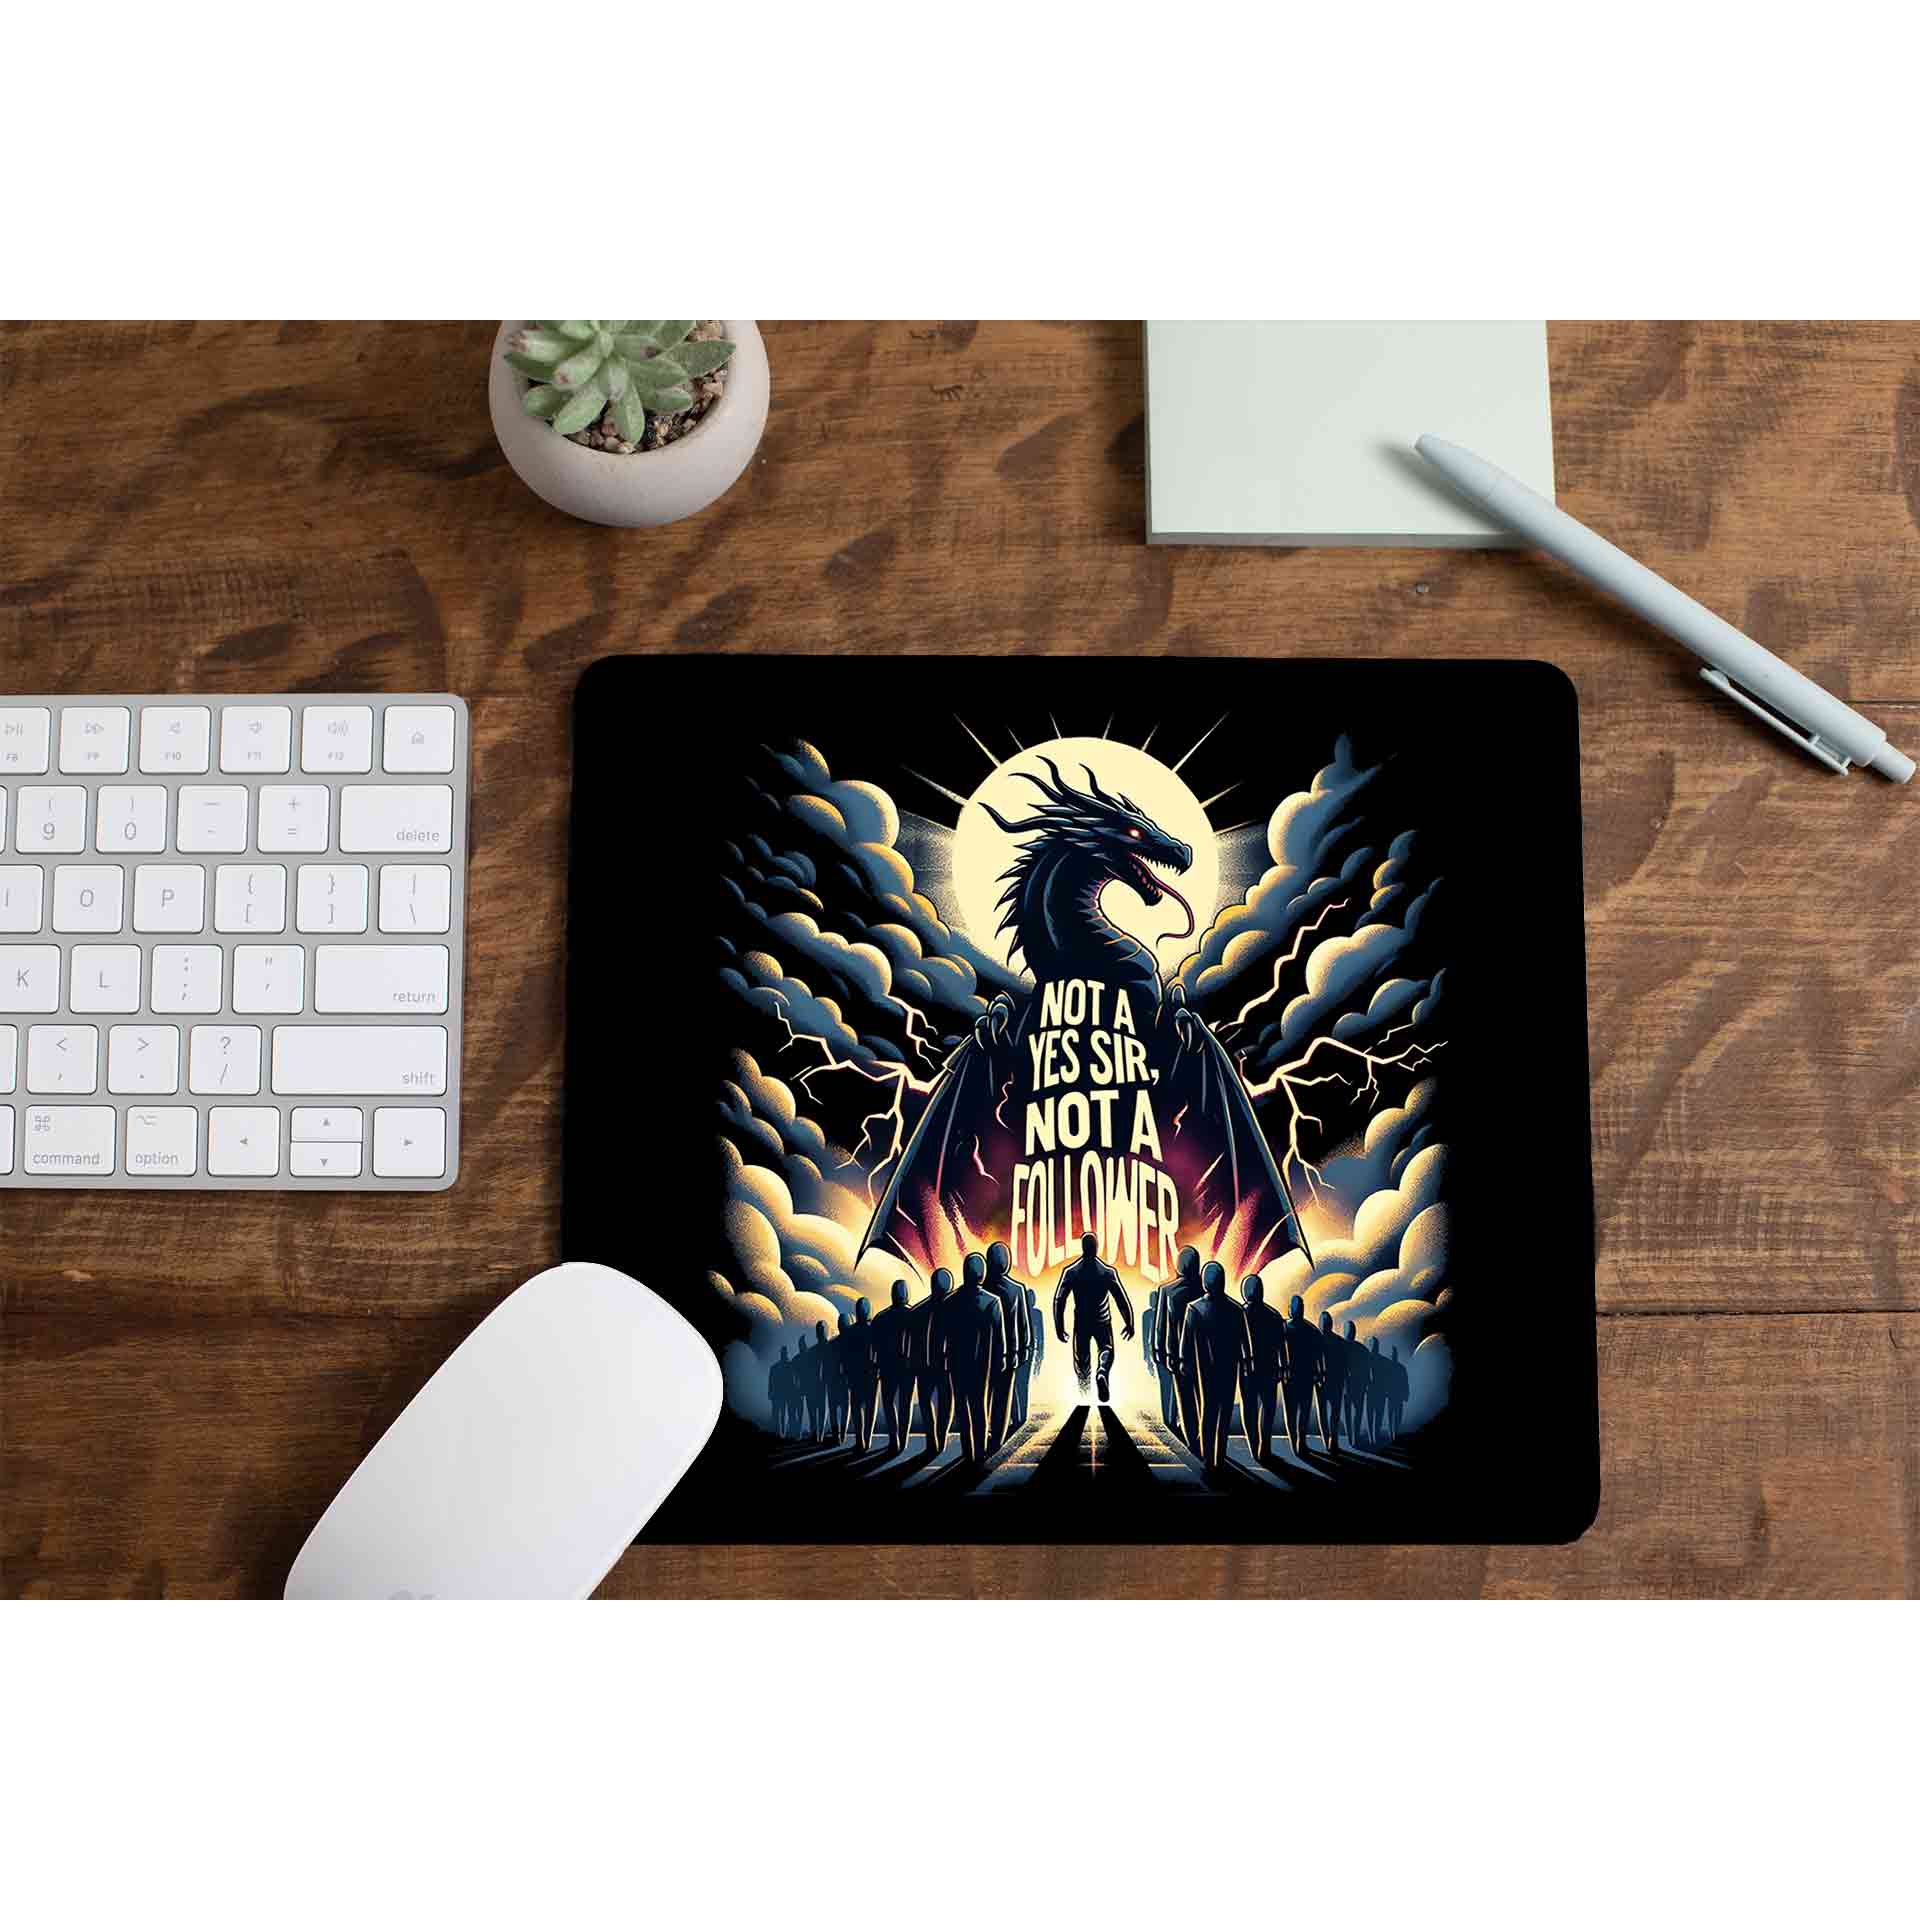 imagine dragons not a yes sir, not a follower mousepad logitech large music band buy online united states of america usa the banyan tee tbt men women girls boys unisex  